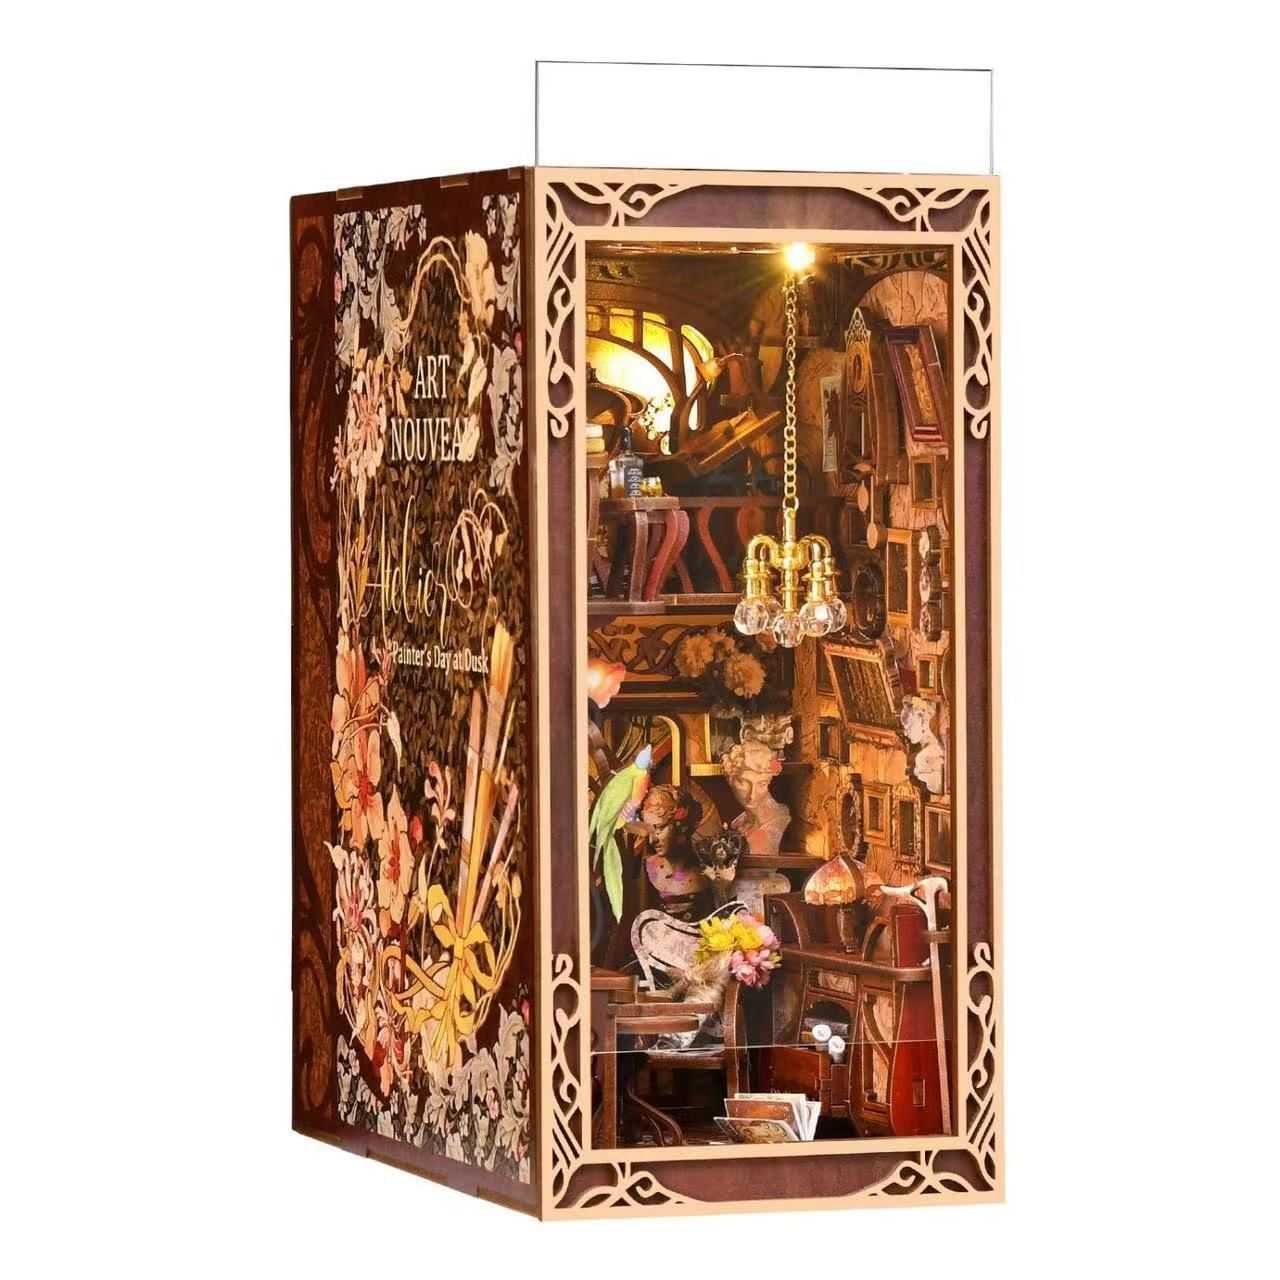 Painter's Day at Dusk DIY Book Nook Kit , A charming miniature 3d wooden puzzles inspired Art Nouveau, perfect for bookshelf decor, and dollhouse collectors, or a gift for art lovers and DIY enthusiasts, left side